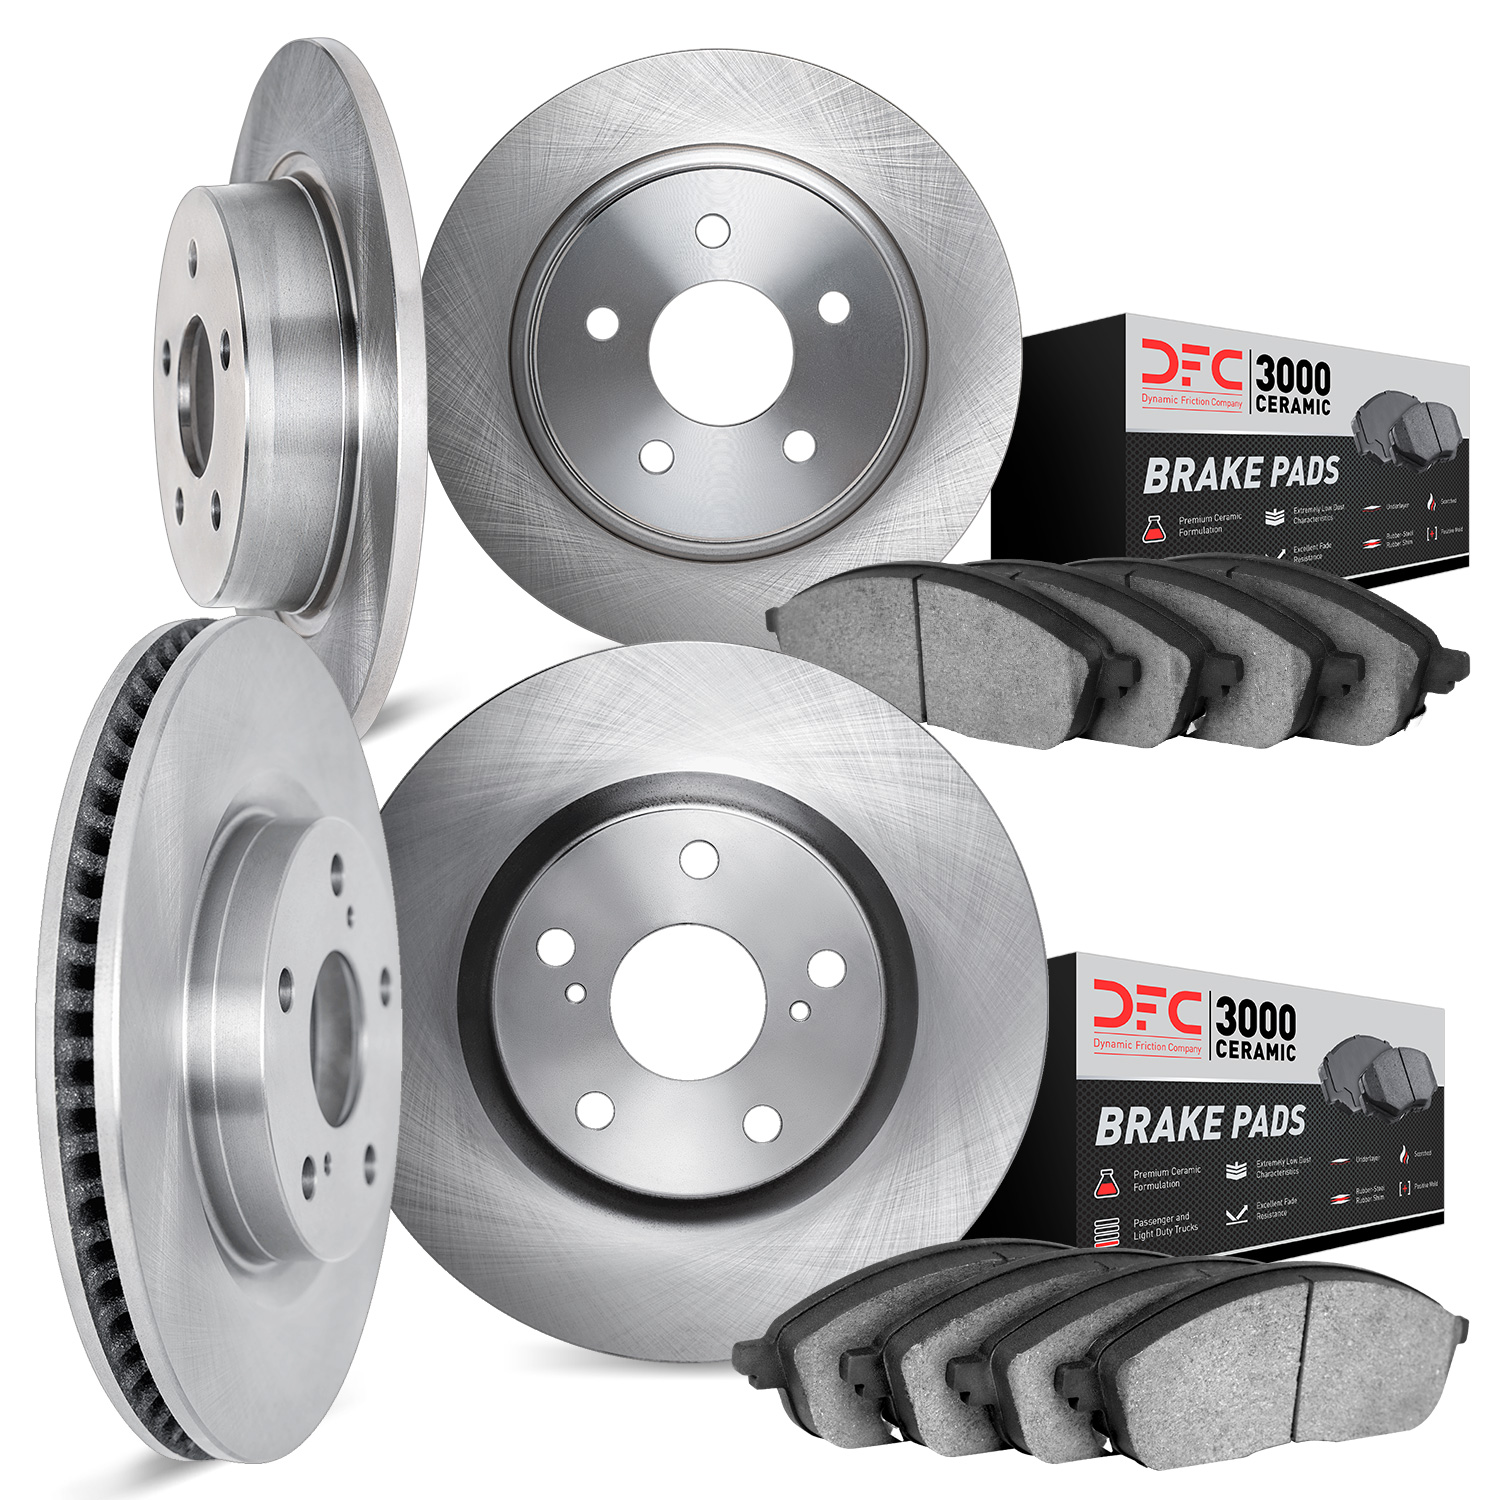 6304-76027 Brake Rotors with 3000-Series Ceramic Brake Pads Kit, 1995-1997 Lexus/Toyota/Scion, Position: Front and Rear